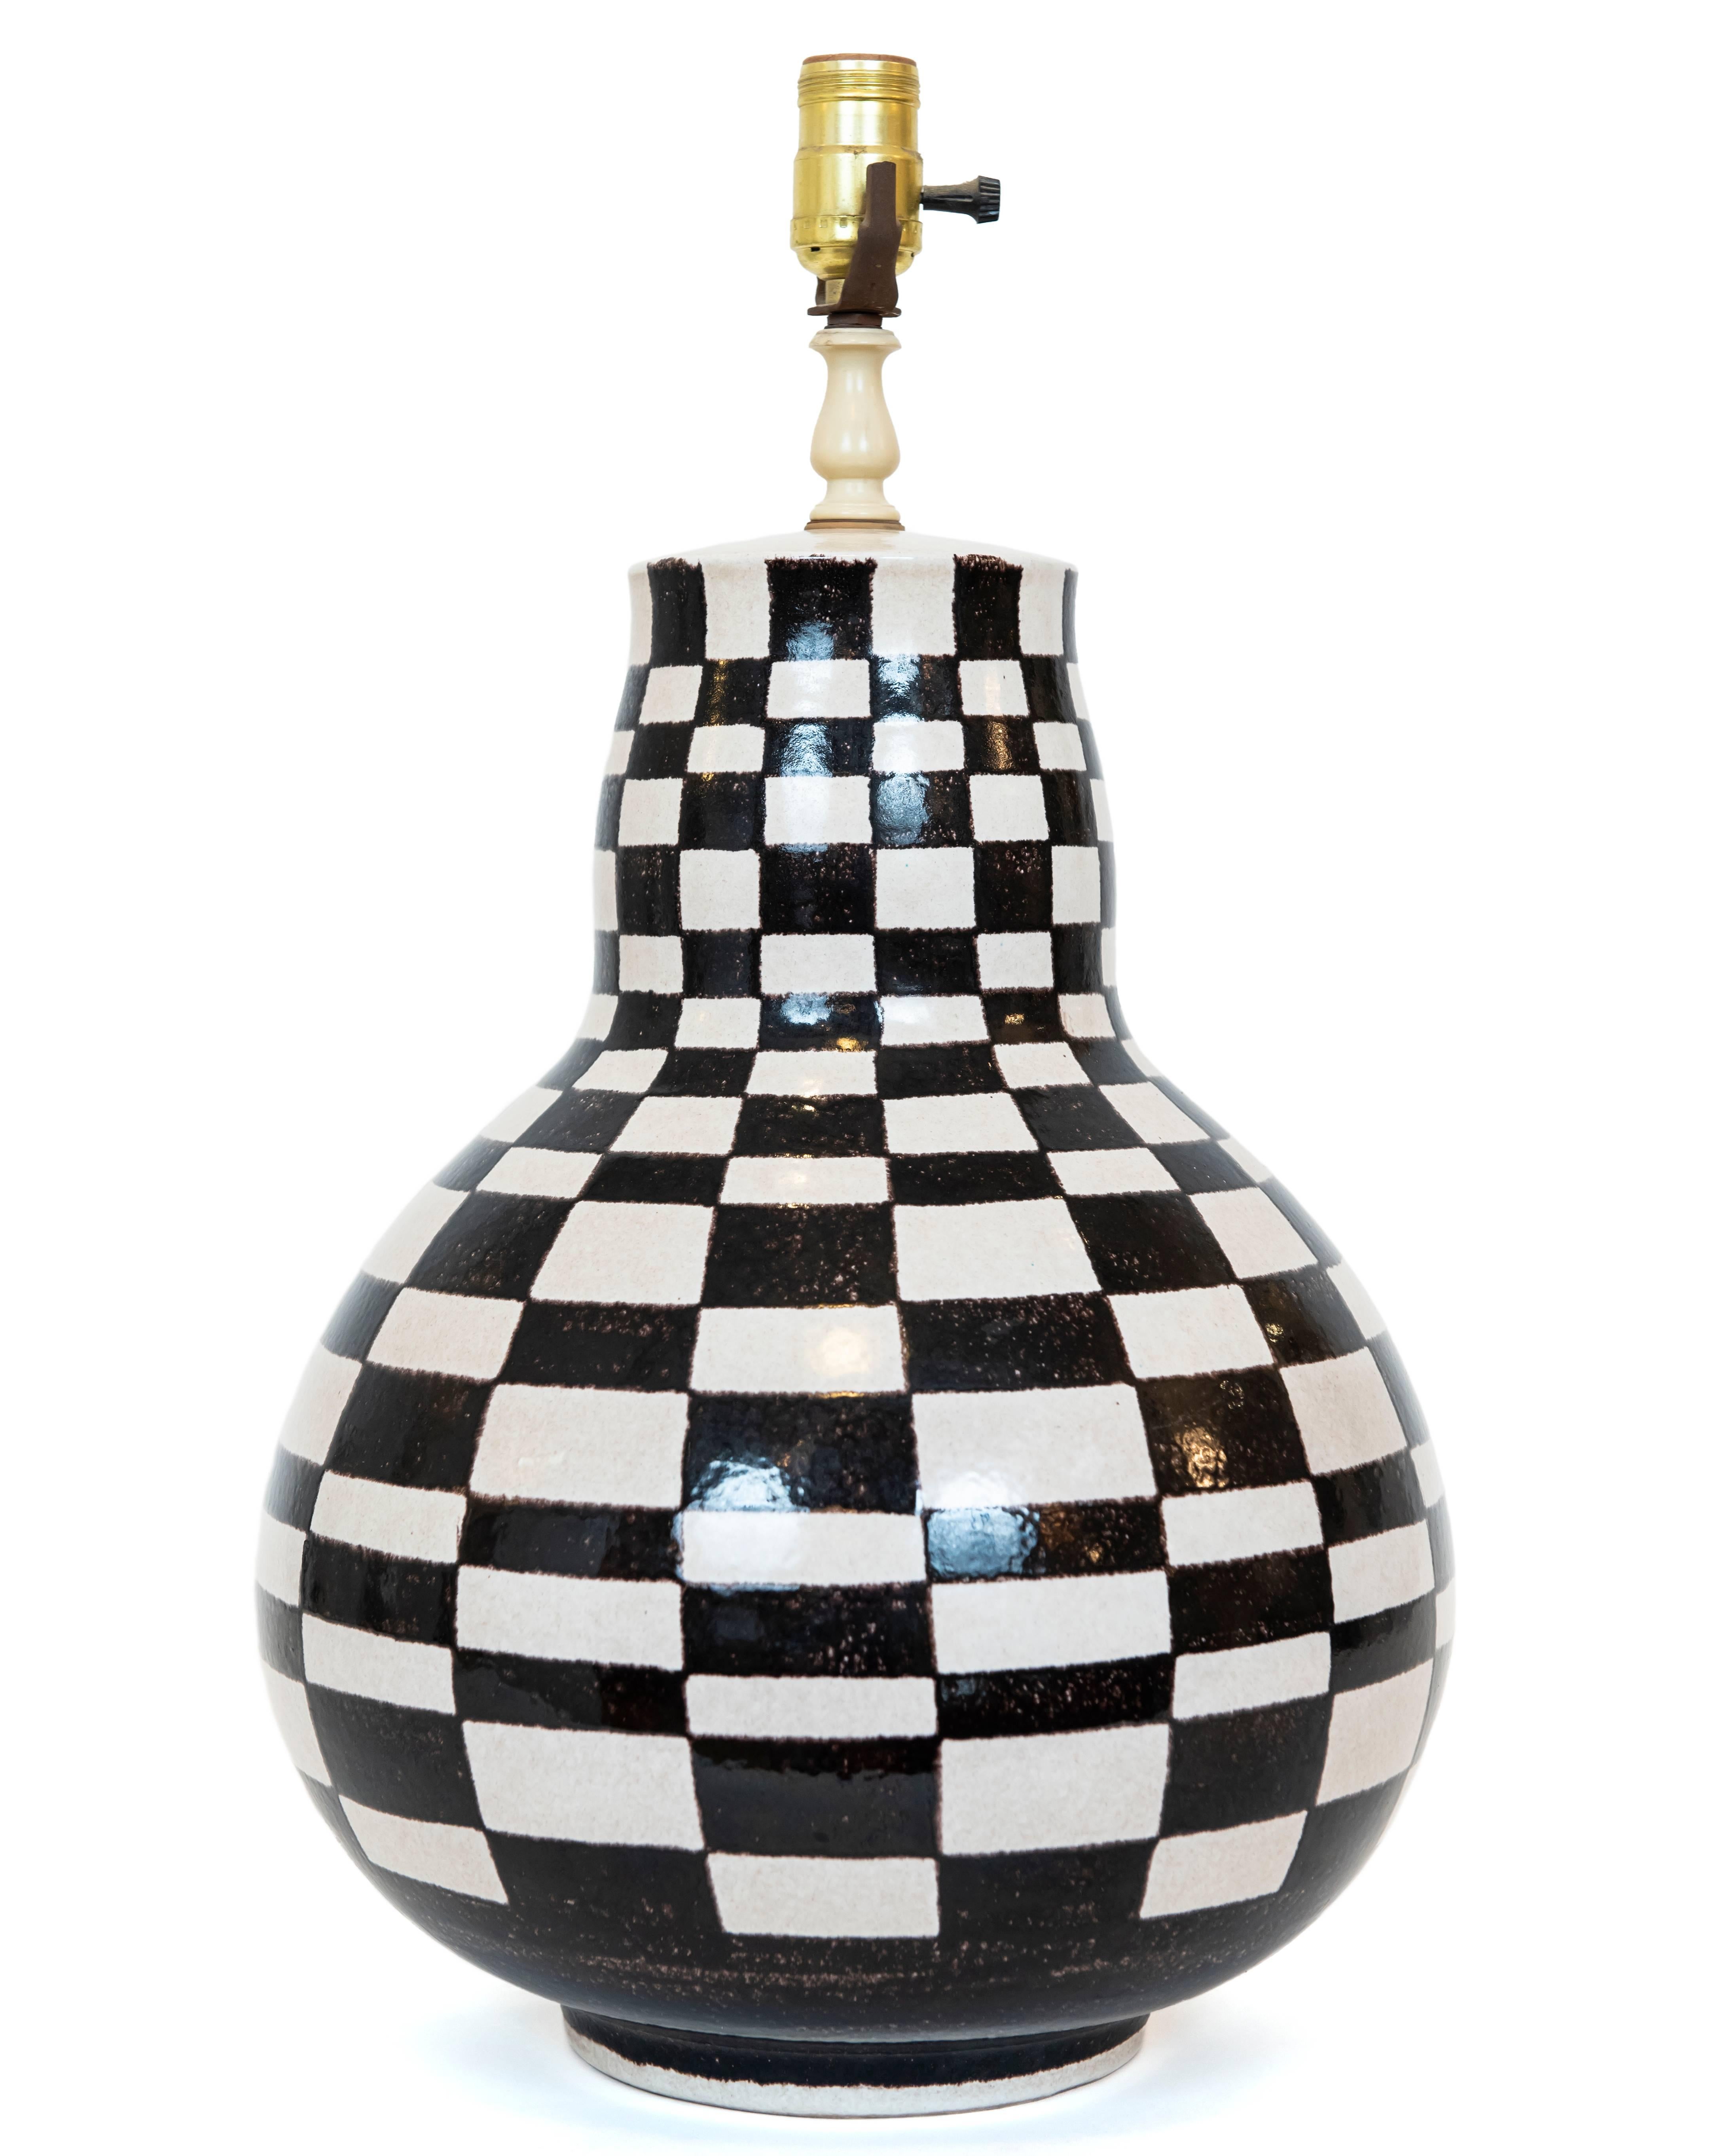 I love the look of this lamp! Black and white checkerboard pattern hand done in Italy over a gourd shaped base. Fun, stylish and unique!
New shade optional. Rewired. Measures: Top of the shade height is 28